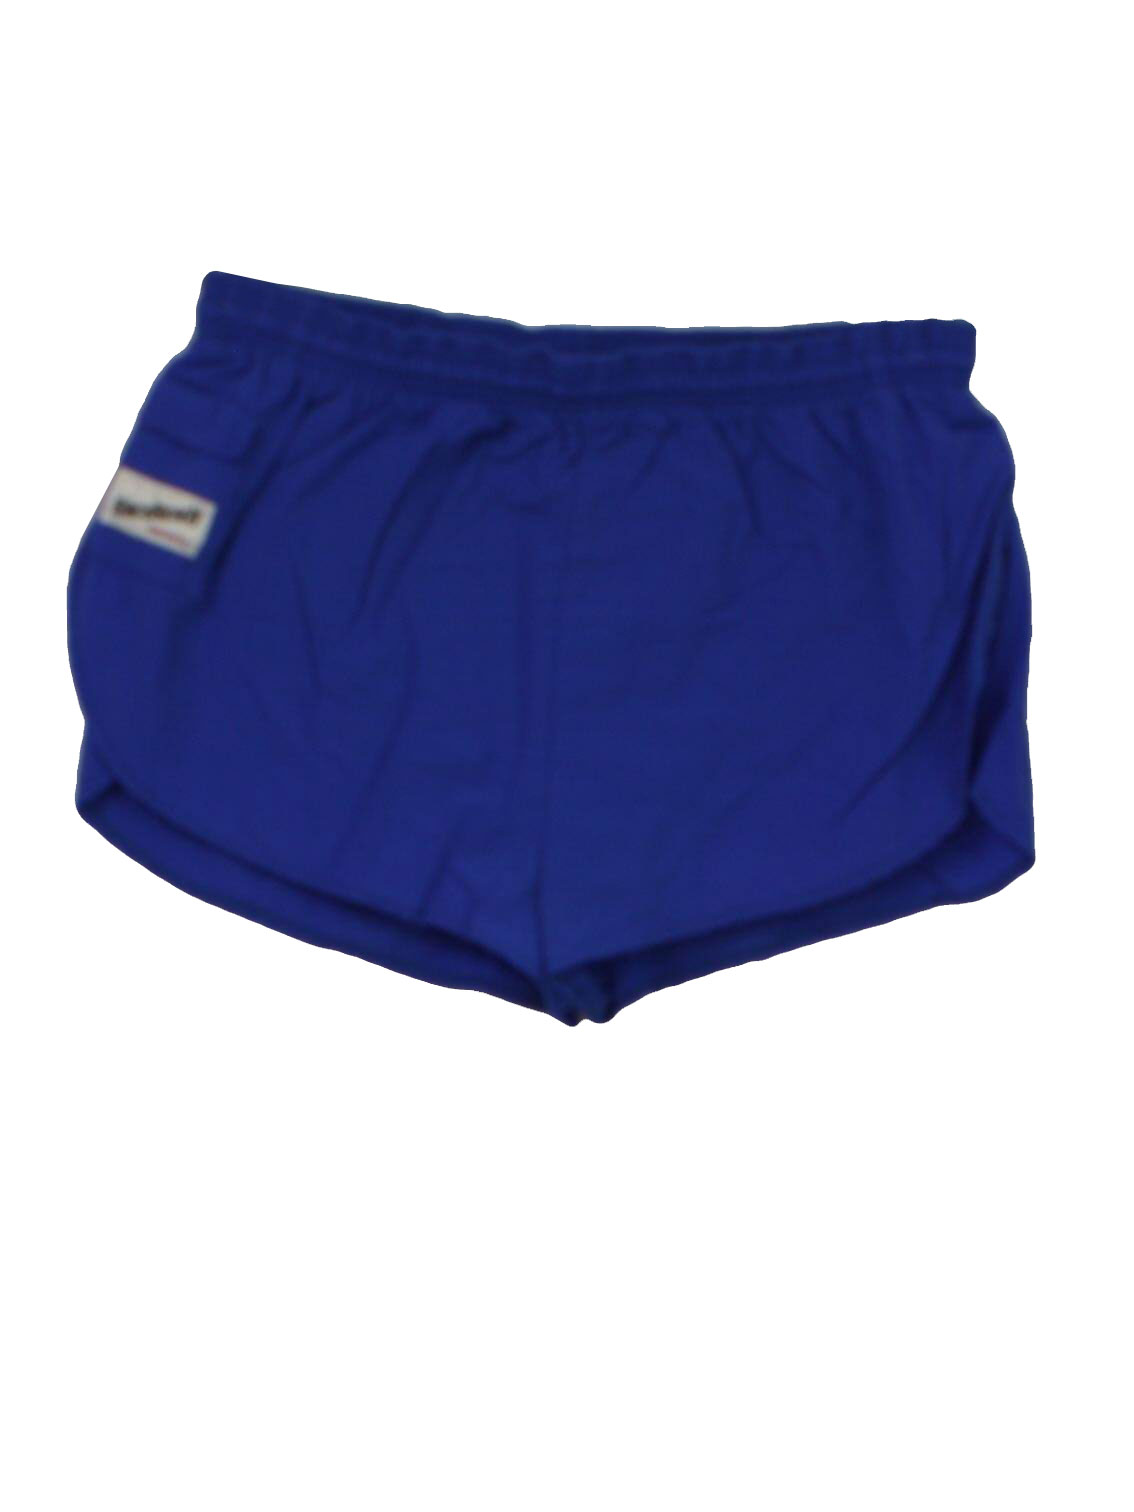 1980's Shorts (Race Ready): 80s -Race Ready- Mens blue background brief ...